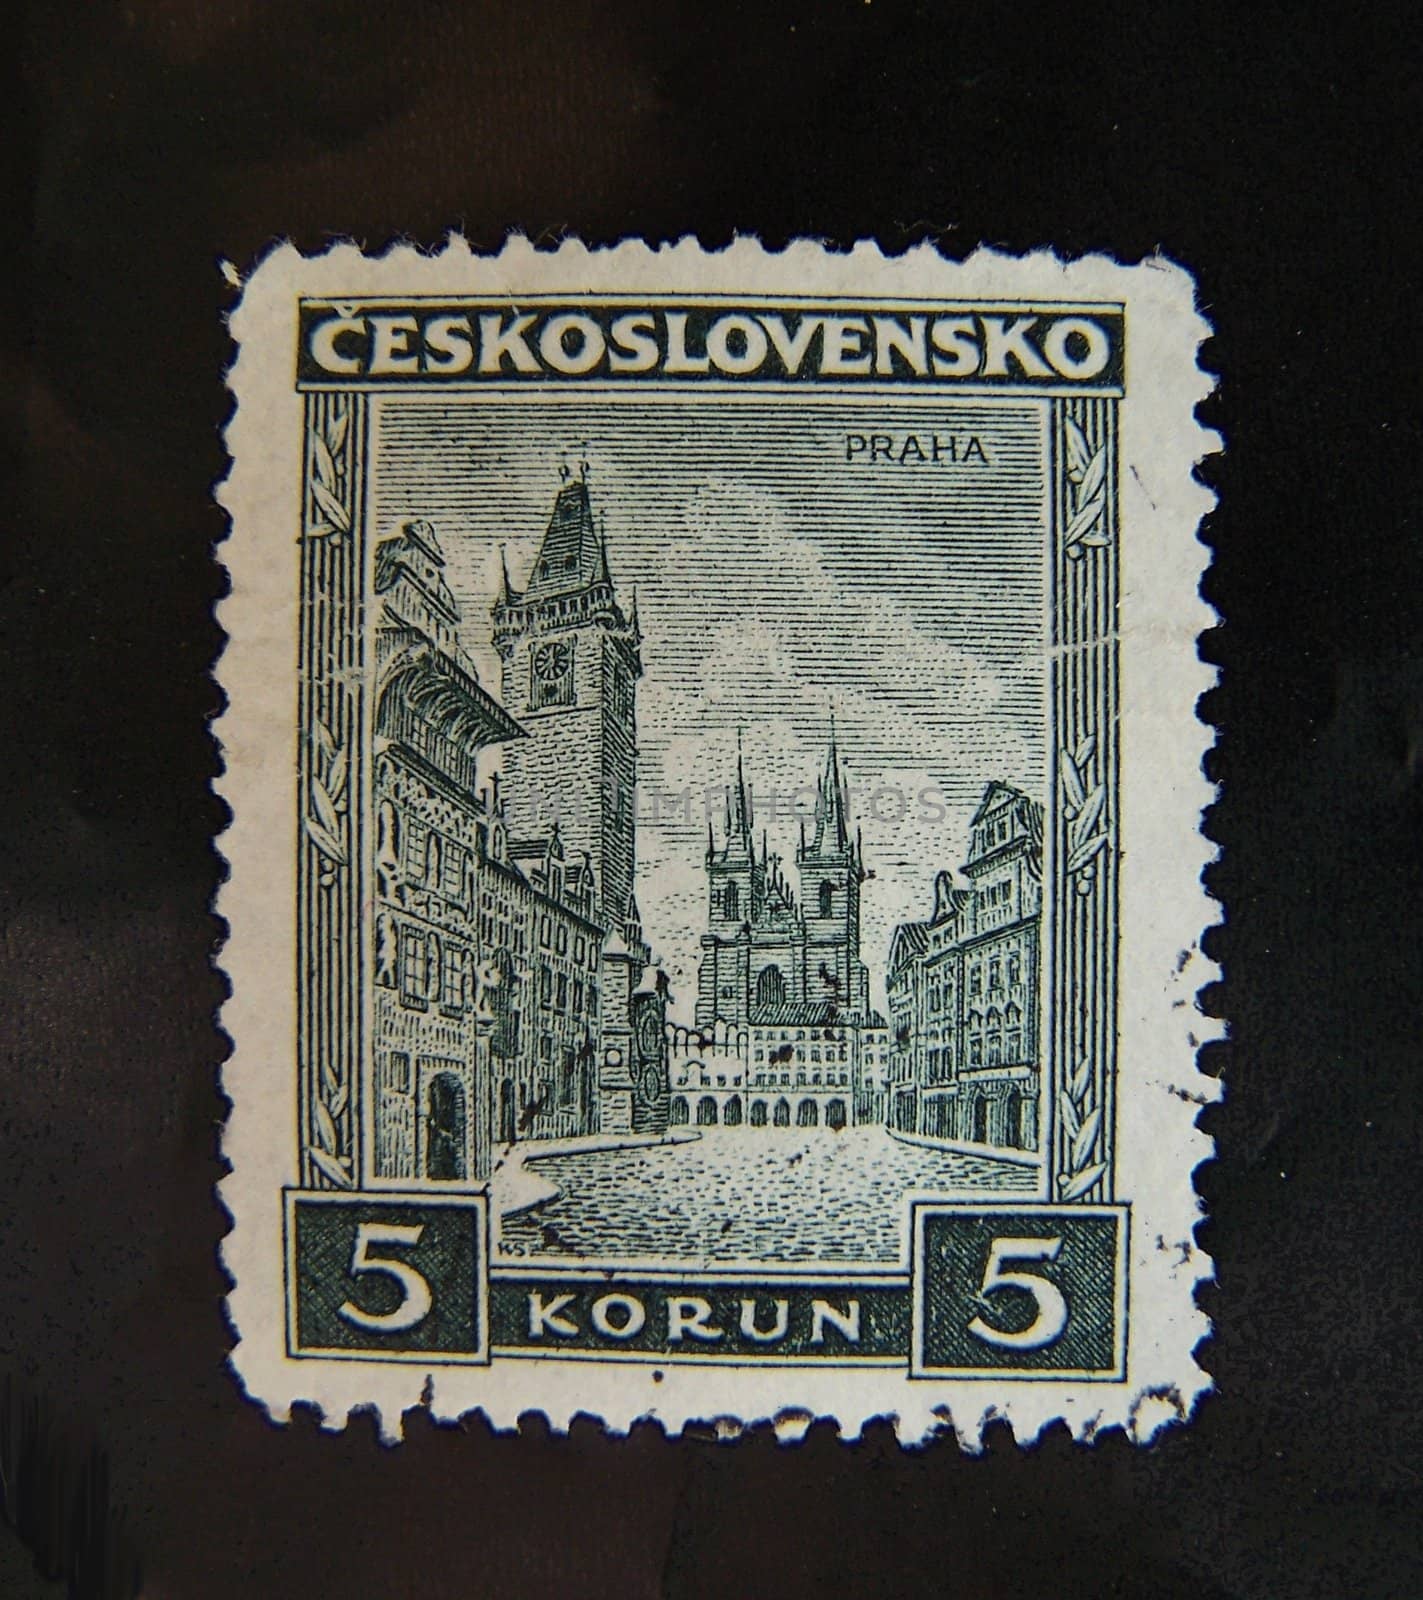 Prague stamp by paolo77